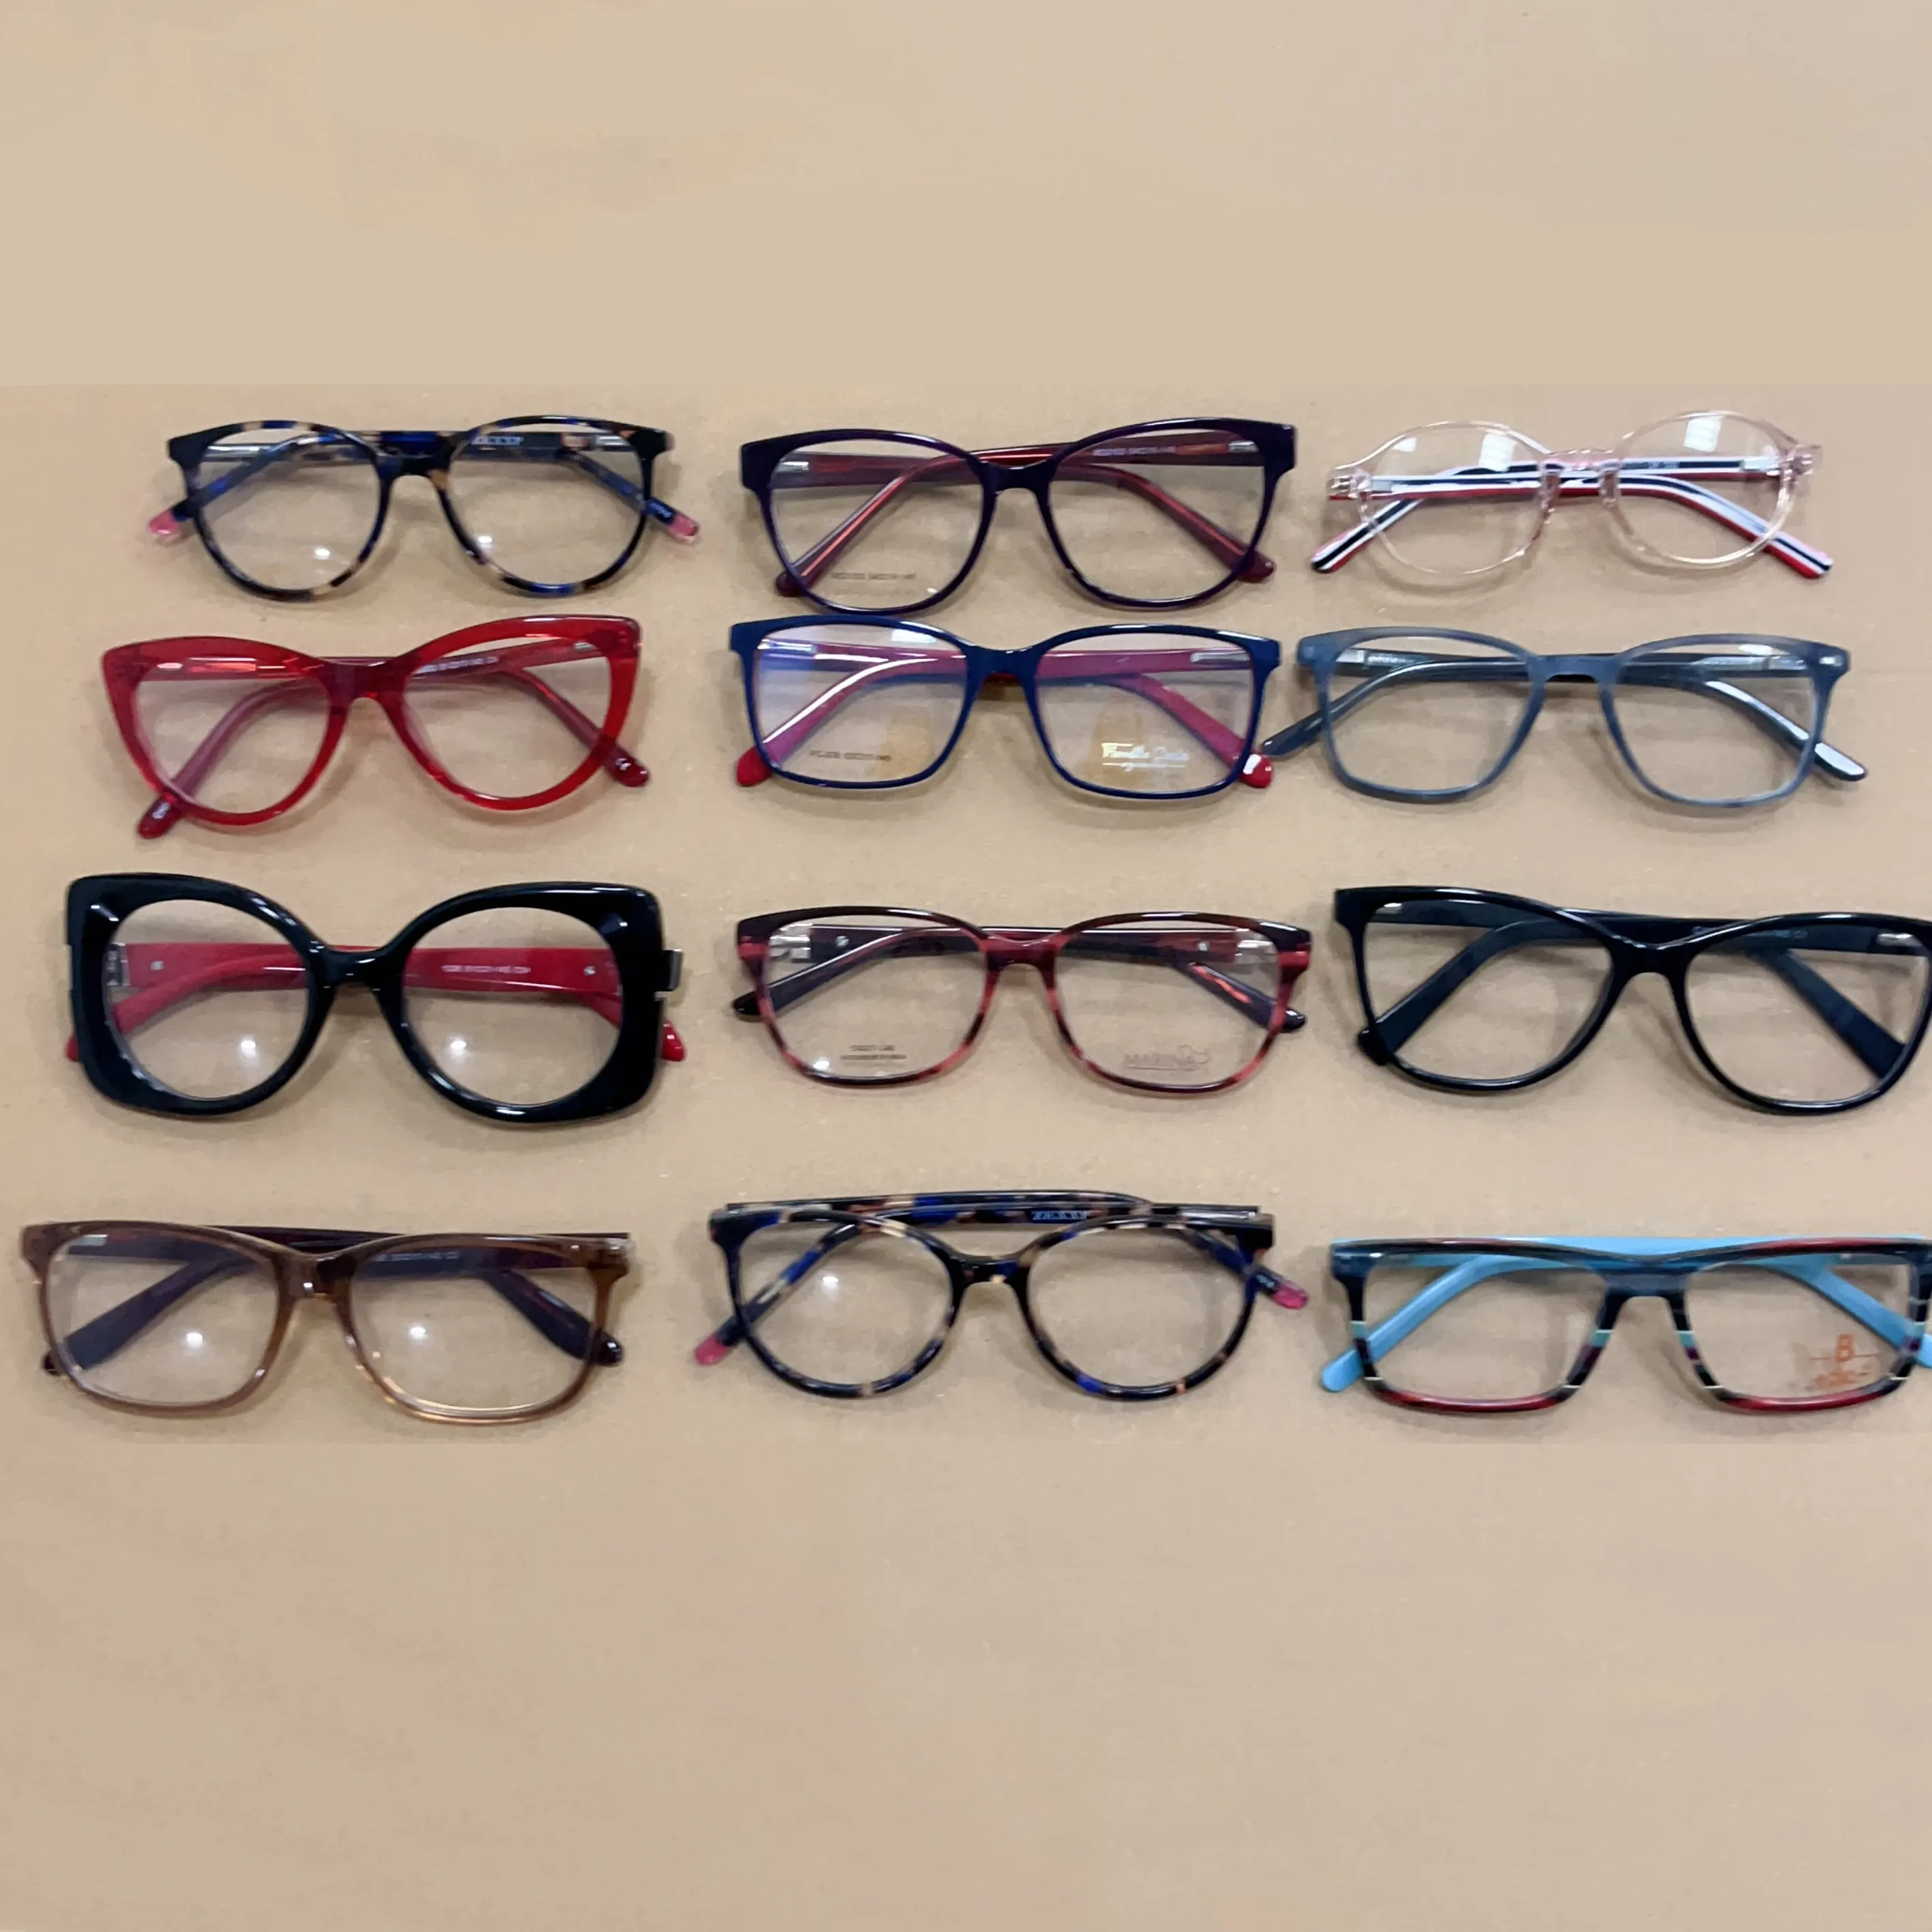 Promotional Assorted Stock Eyewear Mixed Models and Colors Acetate Optical Eyeglasses Frames